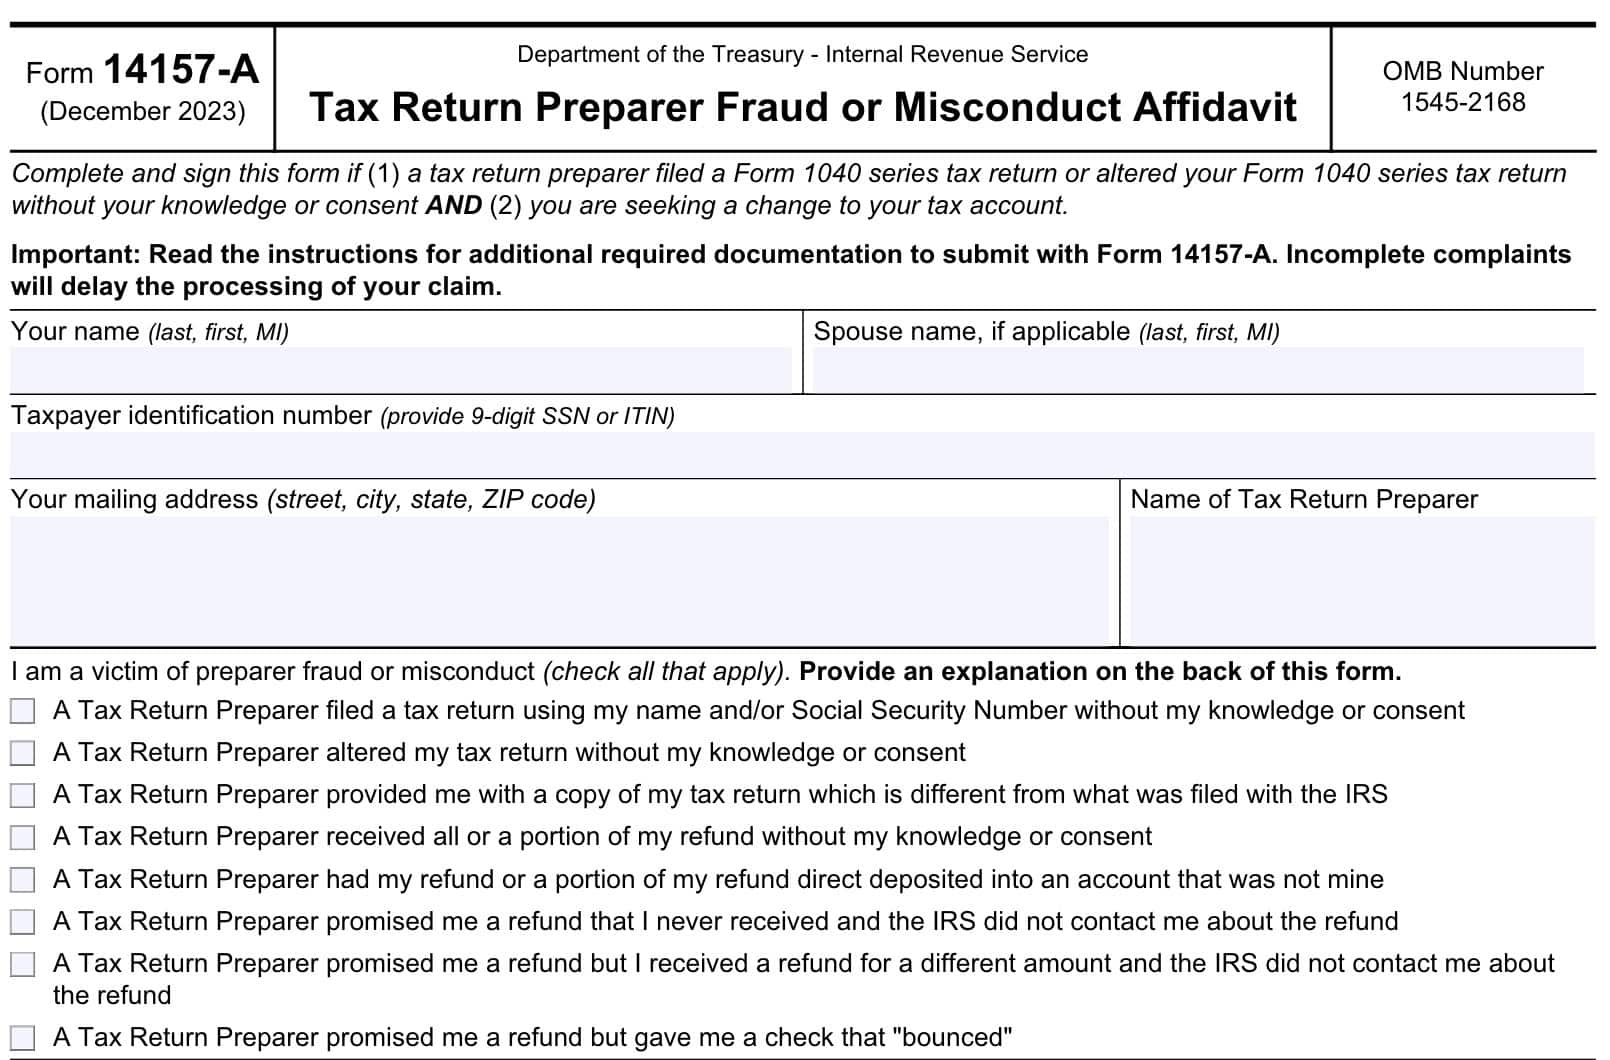 IRS Form 14157-A, tax return preparer fraud or misconduct affidavit, taxpayer information and type of fraud